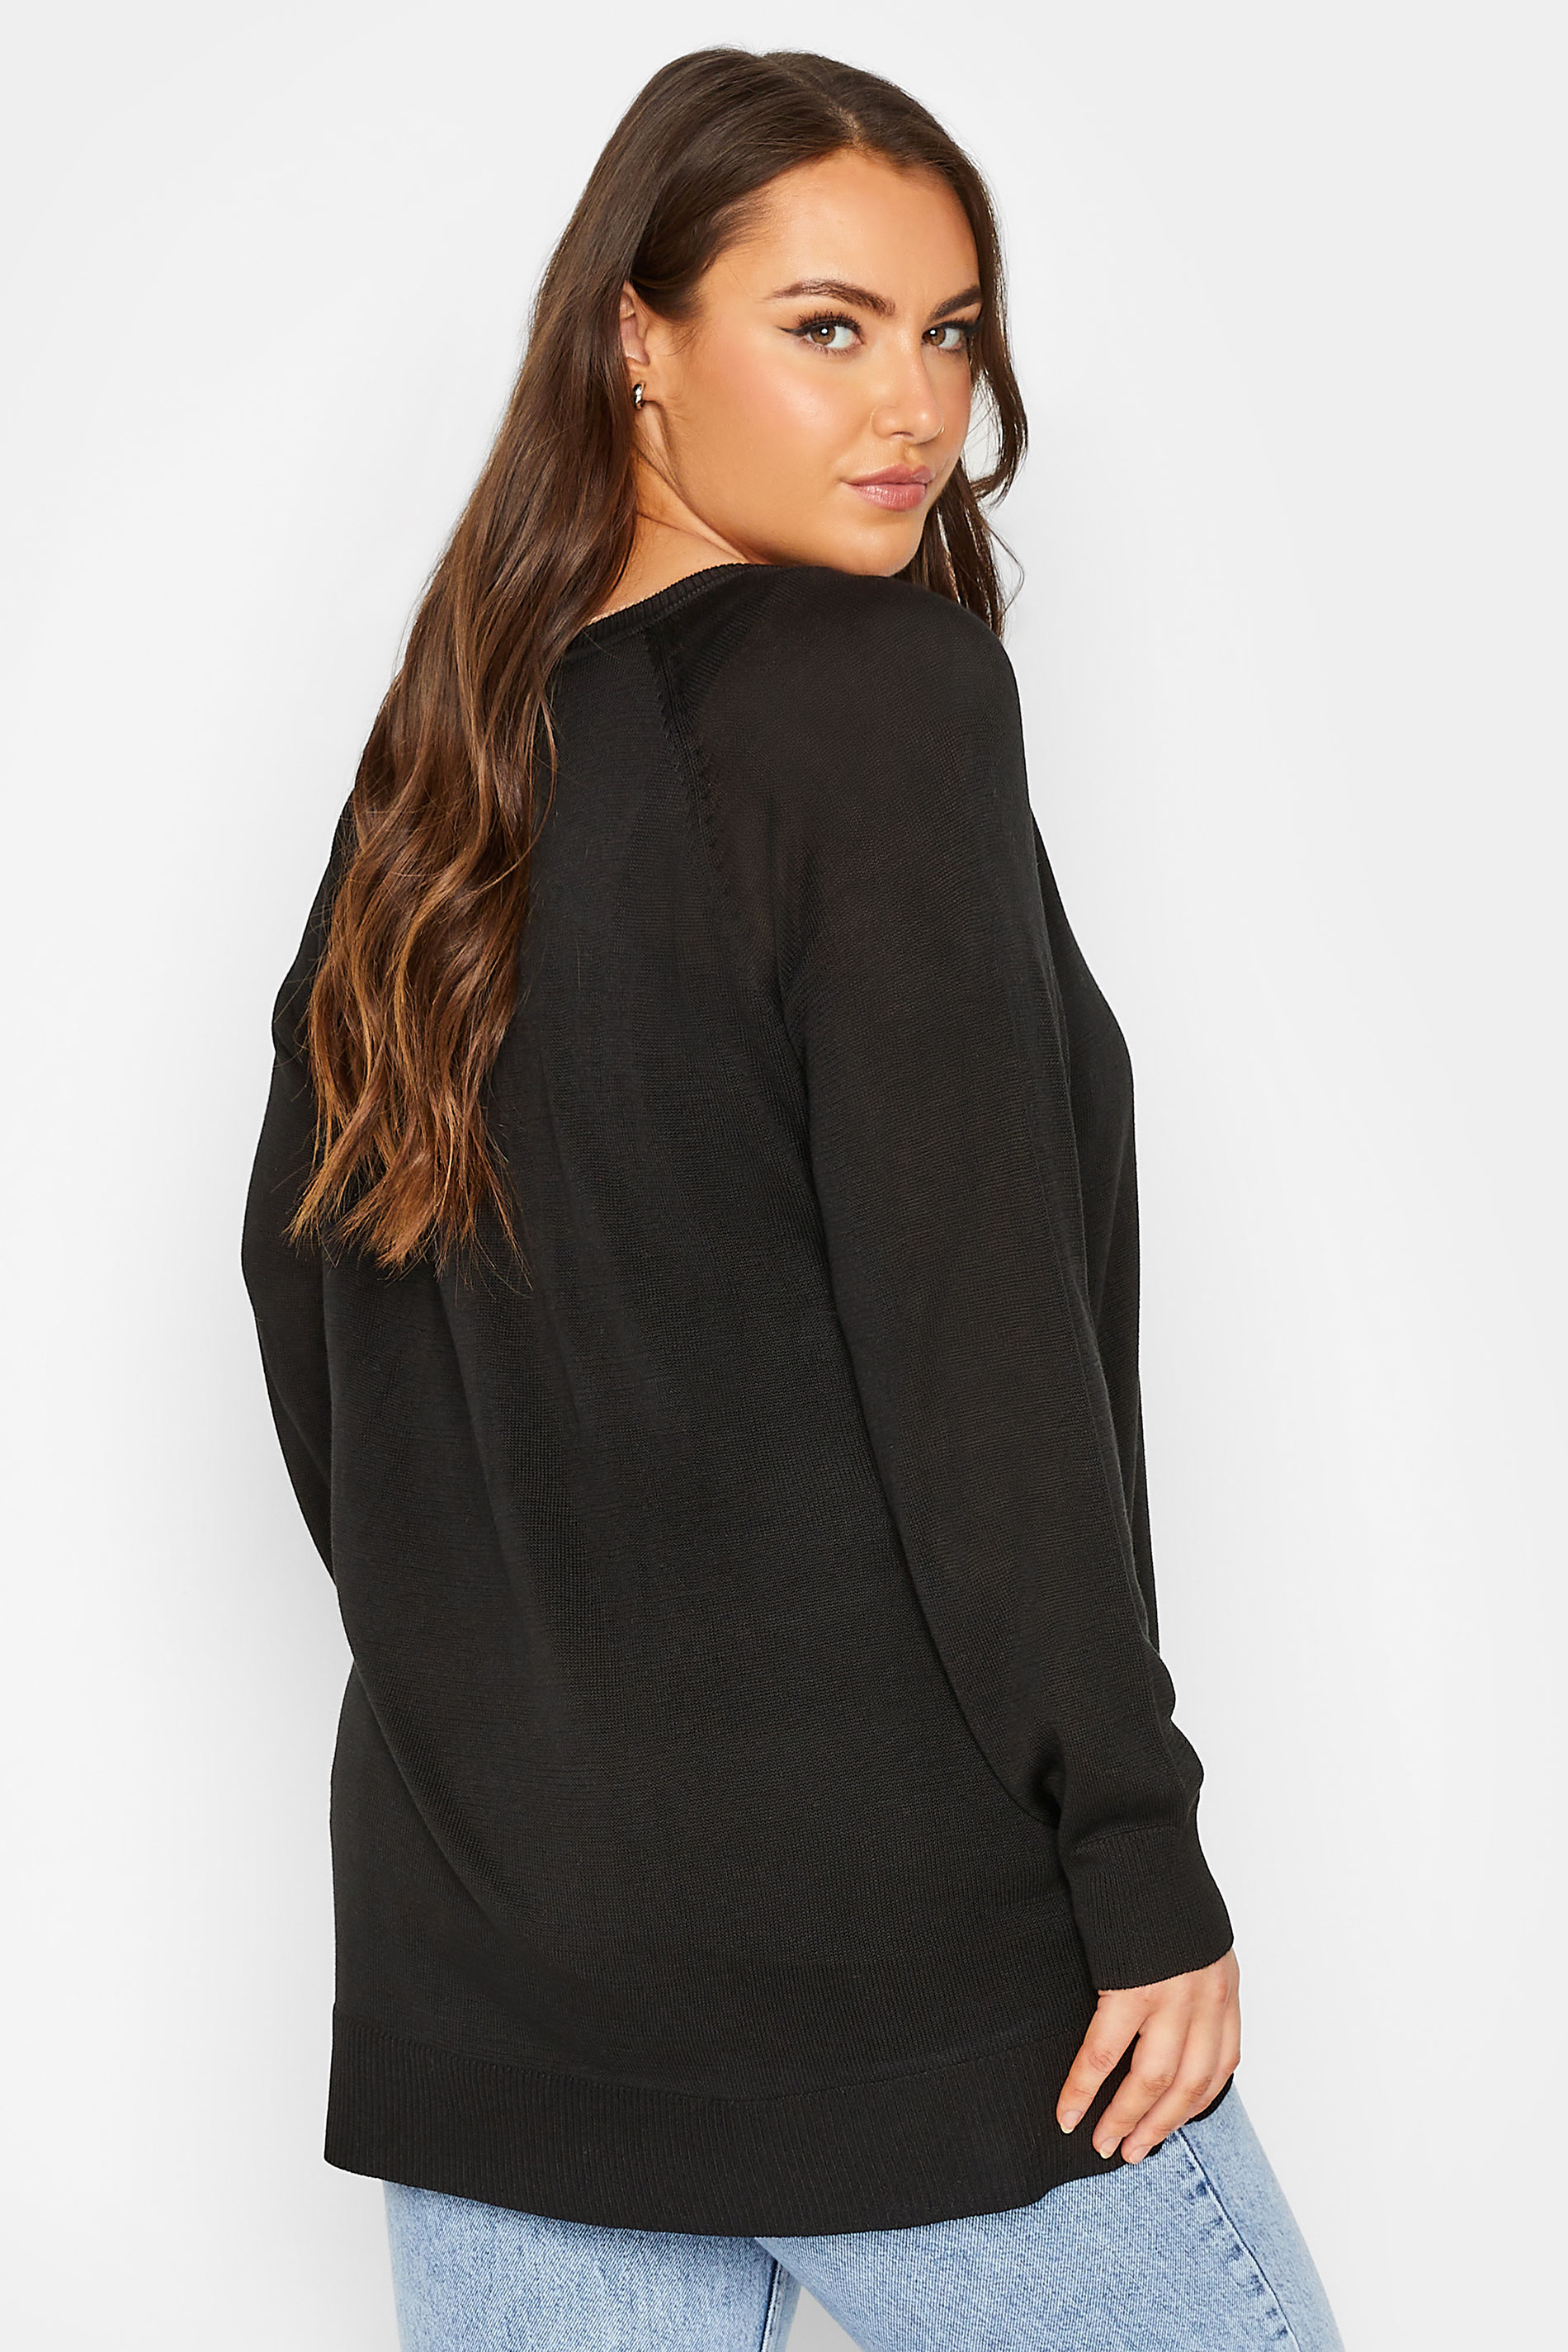 YOURS Curve Black Fine Knit Jumper | Yours Clothing 3